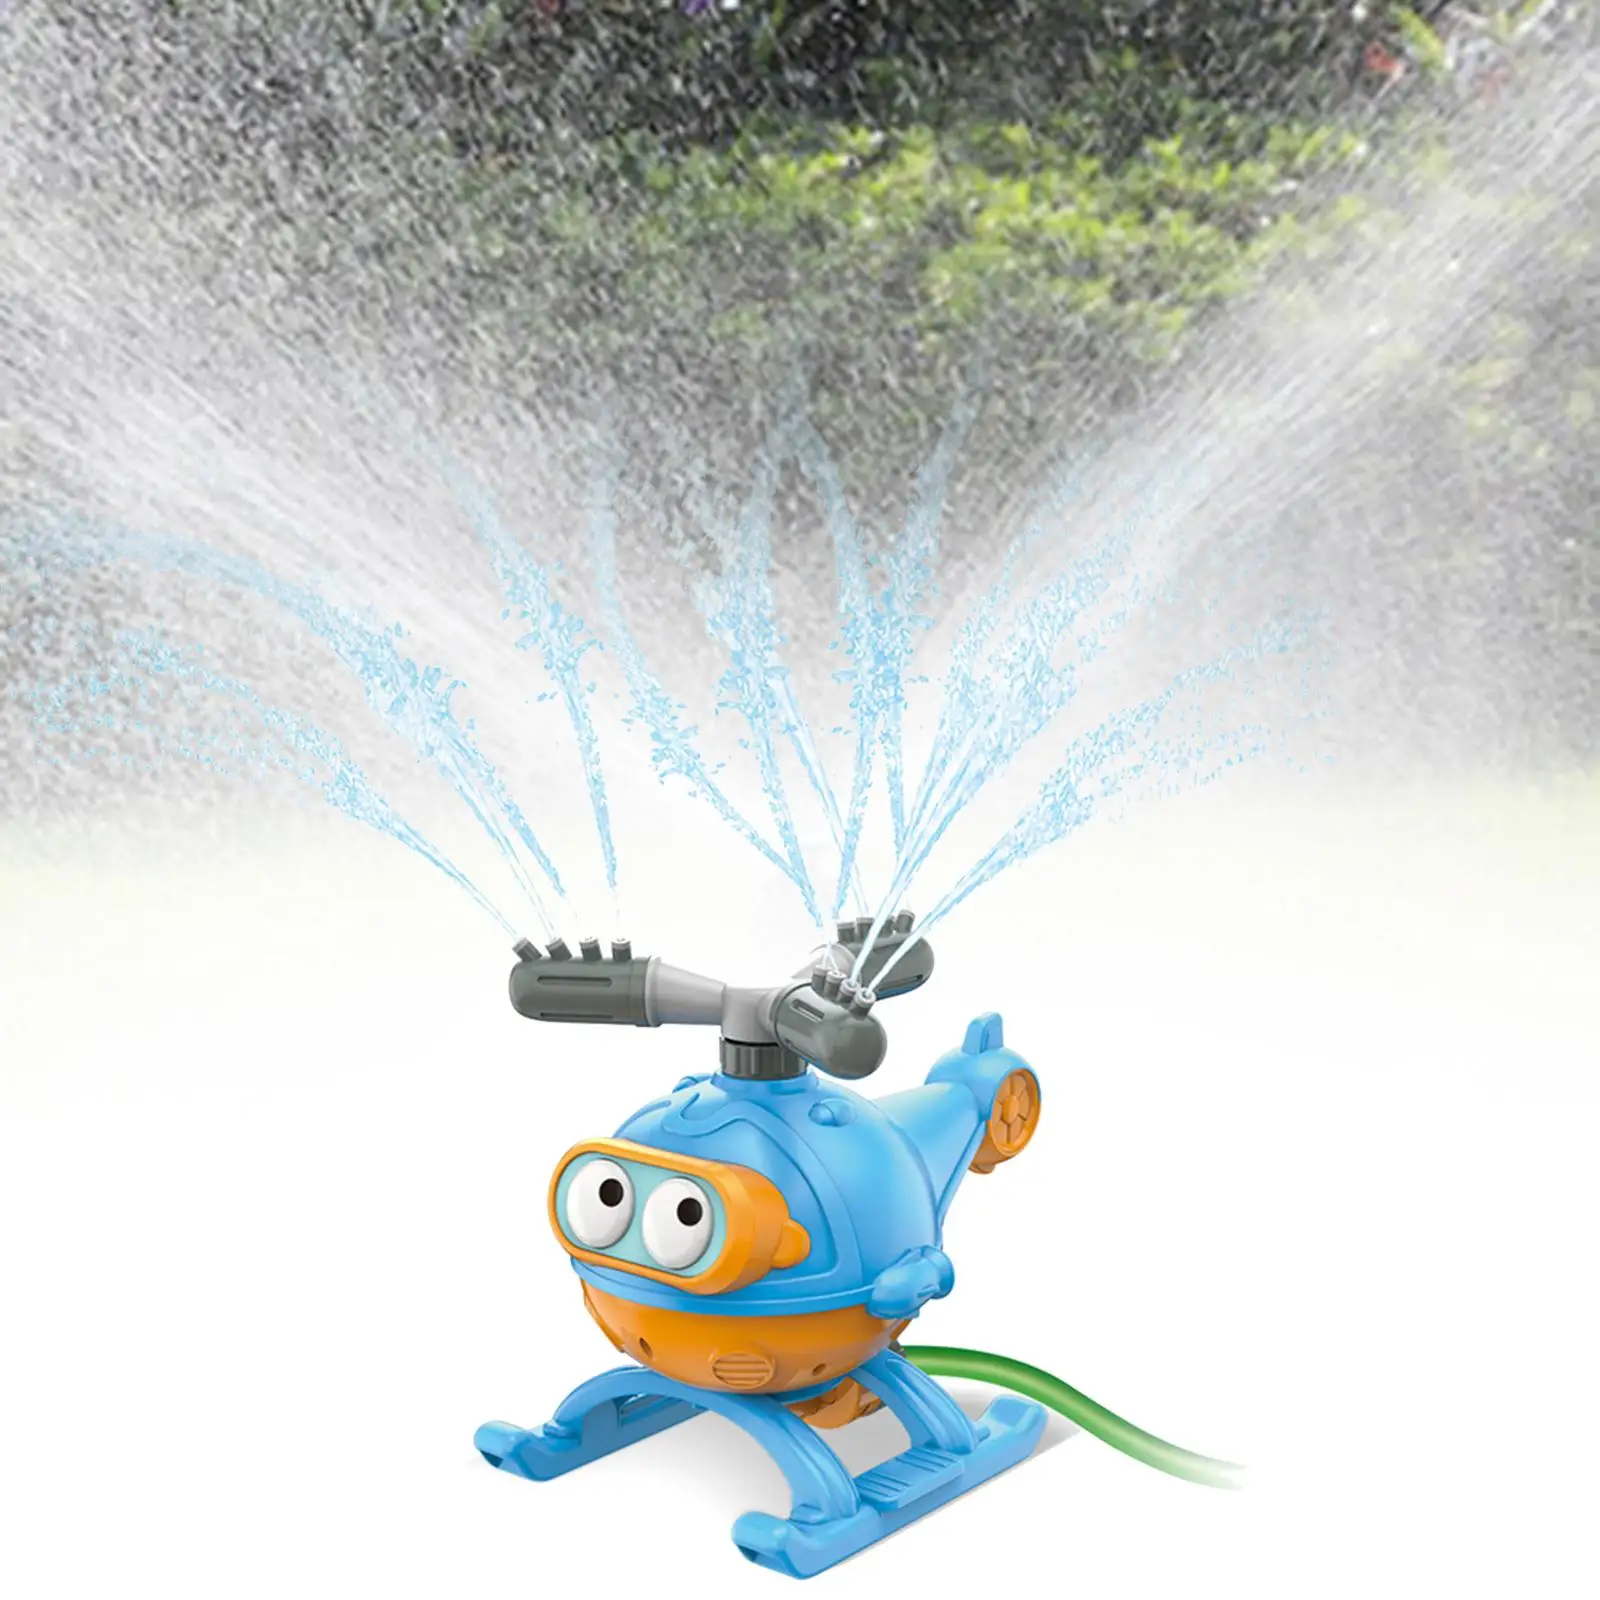 Helicopter Water Toys Water Pressure Control Water Splashing Fun Toy for Backyard Pool Parties Birthday Gift Summer Toy